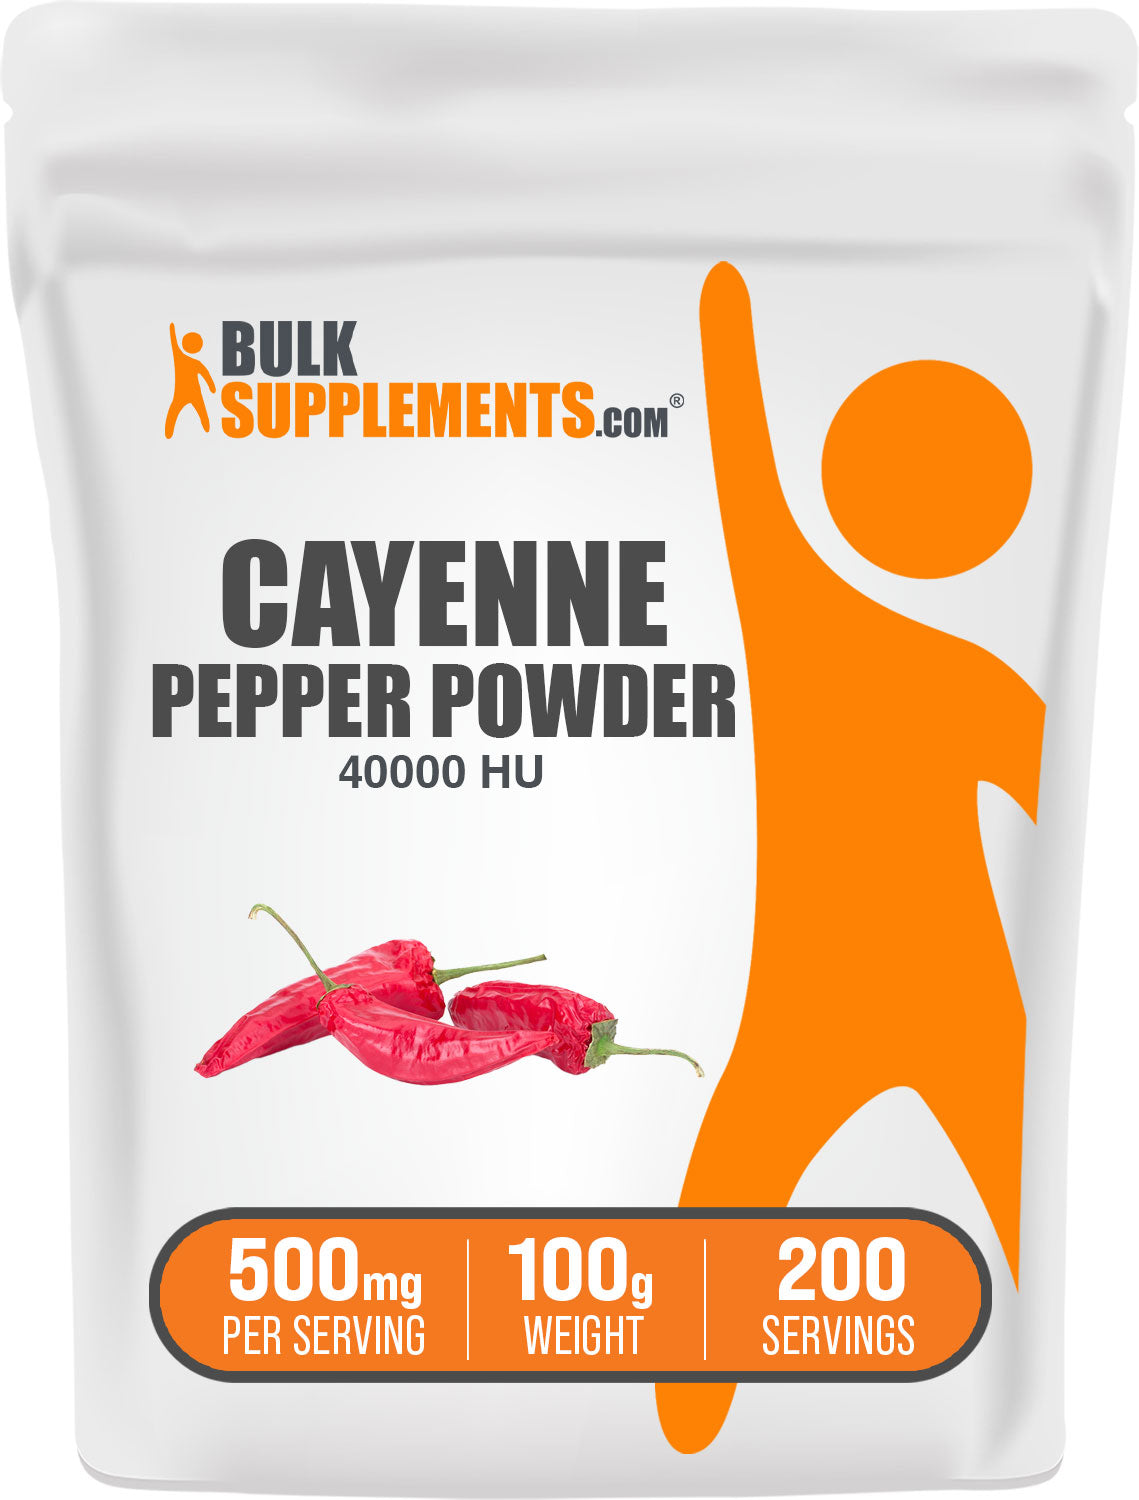 Cayenne Pepper Powder - Get the Flavorful Benefits Now